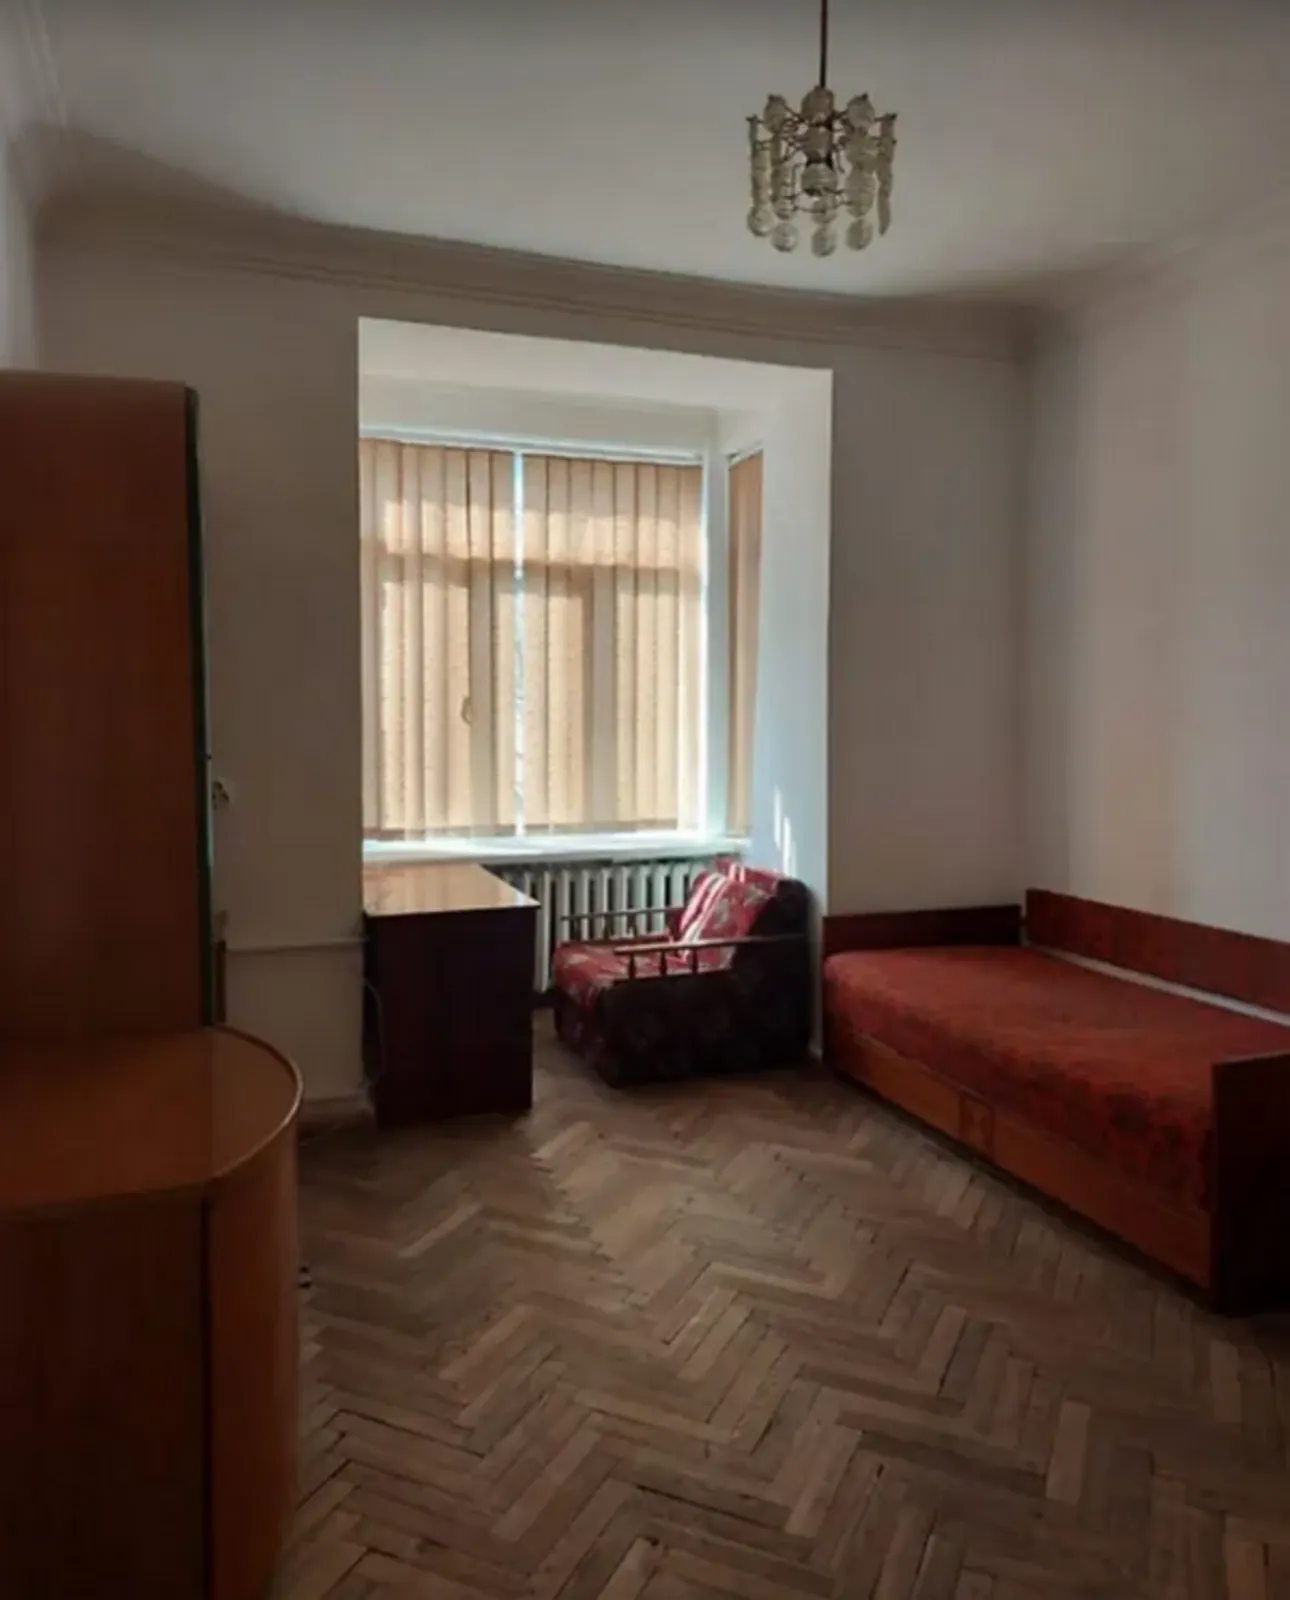 Apartments for sale. 2 rooms, 50 m², 2nd floor/5 floors. Tsentr, Ternopil. 